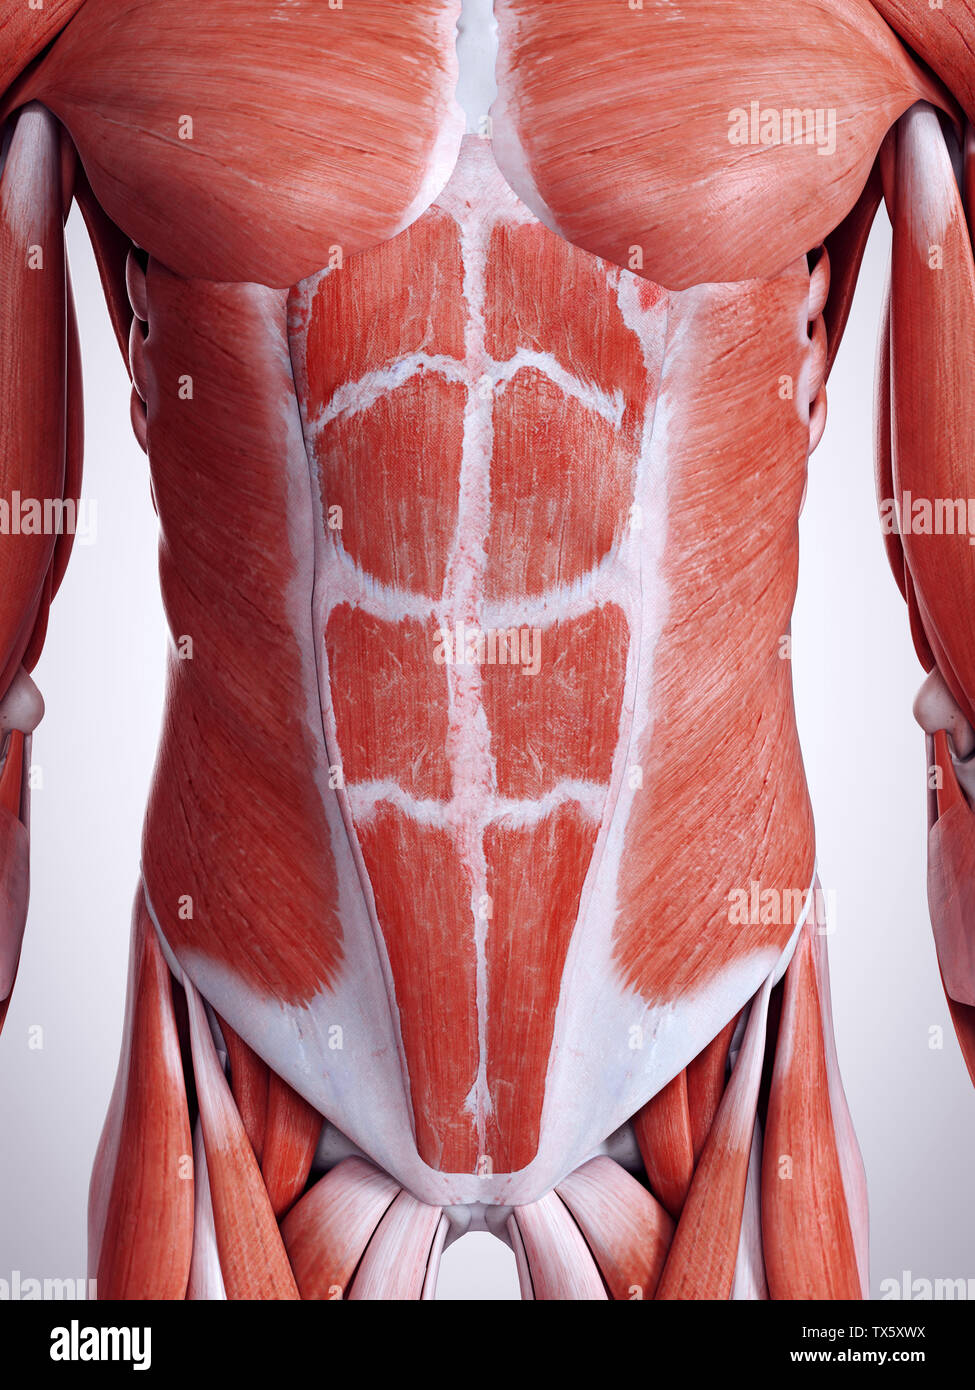 3d rendered medically accurate illustration of the abdominal muscles Stock Photo